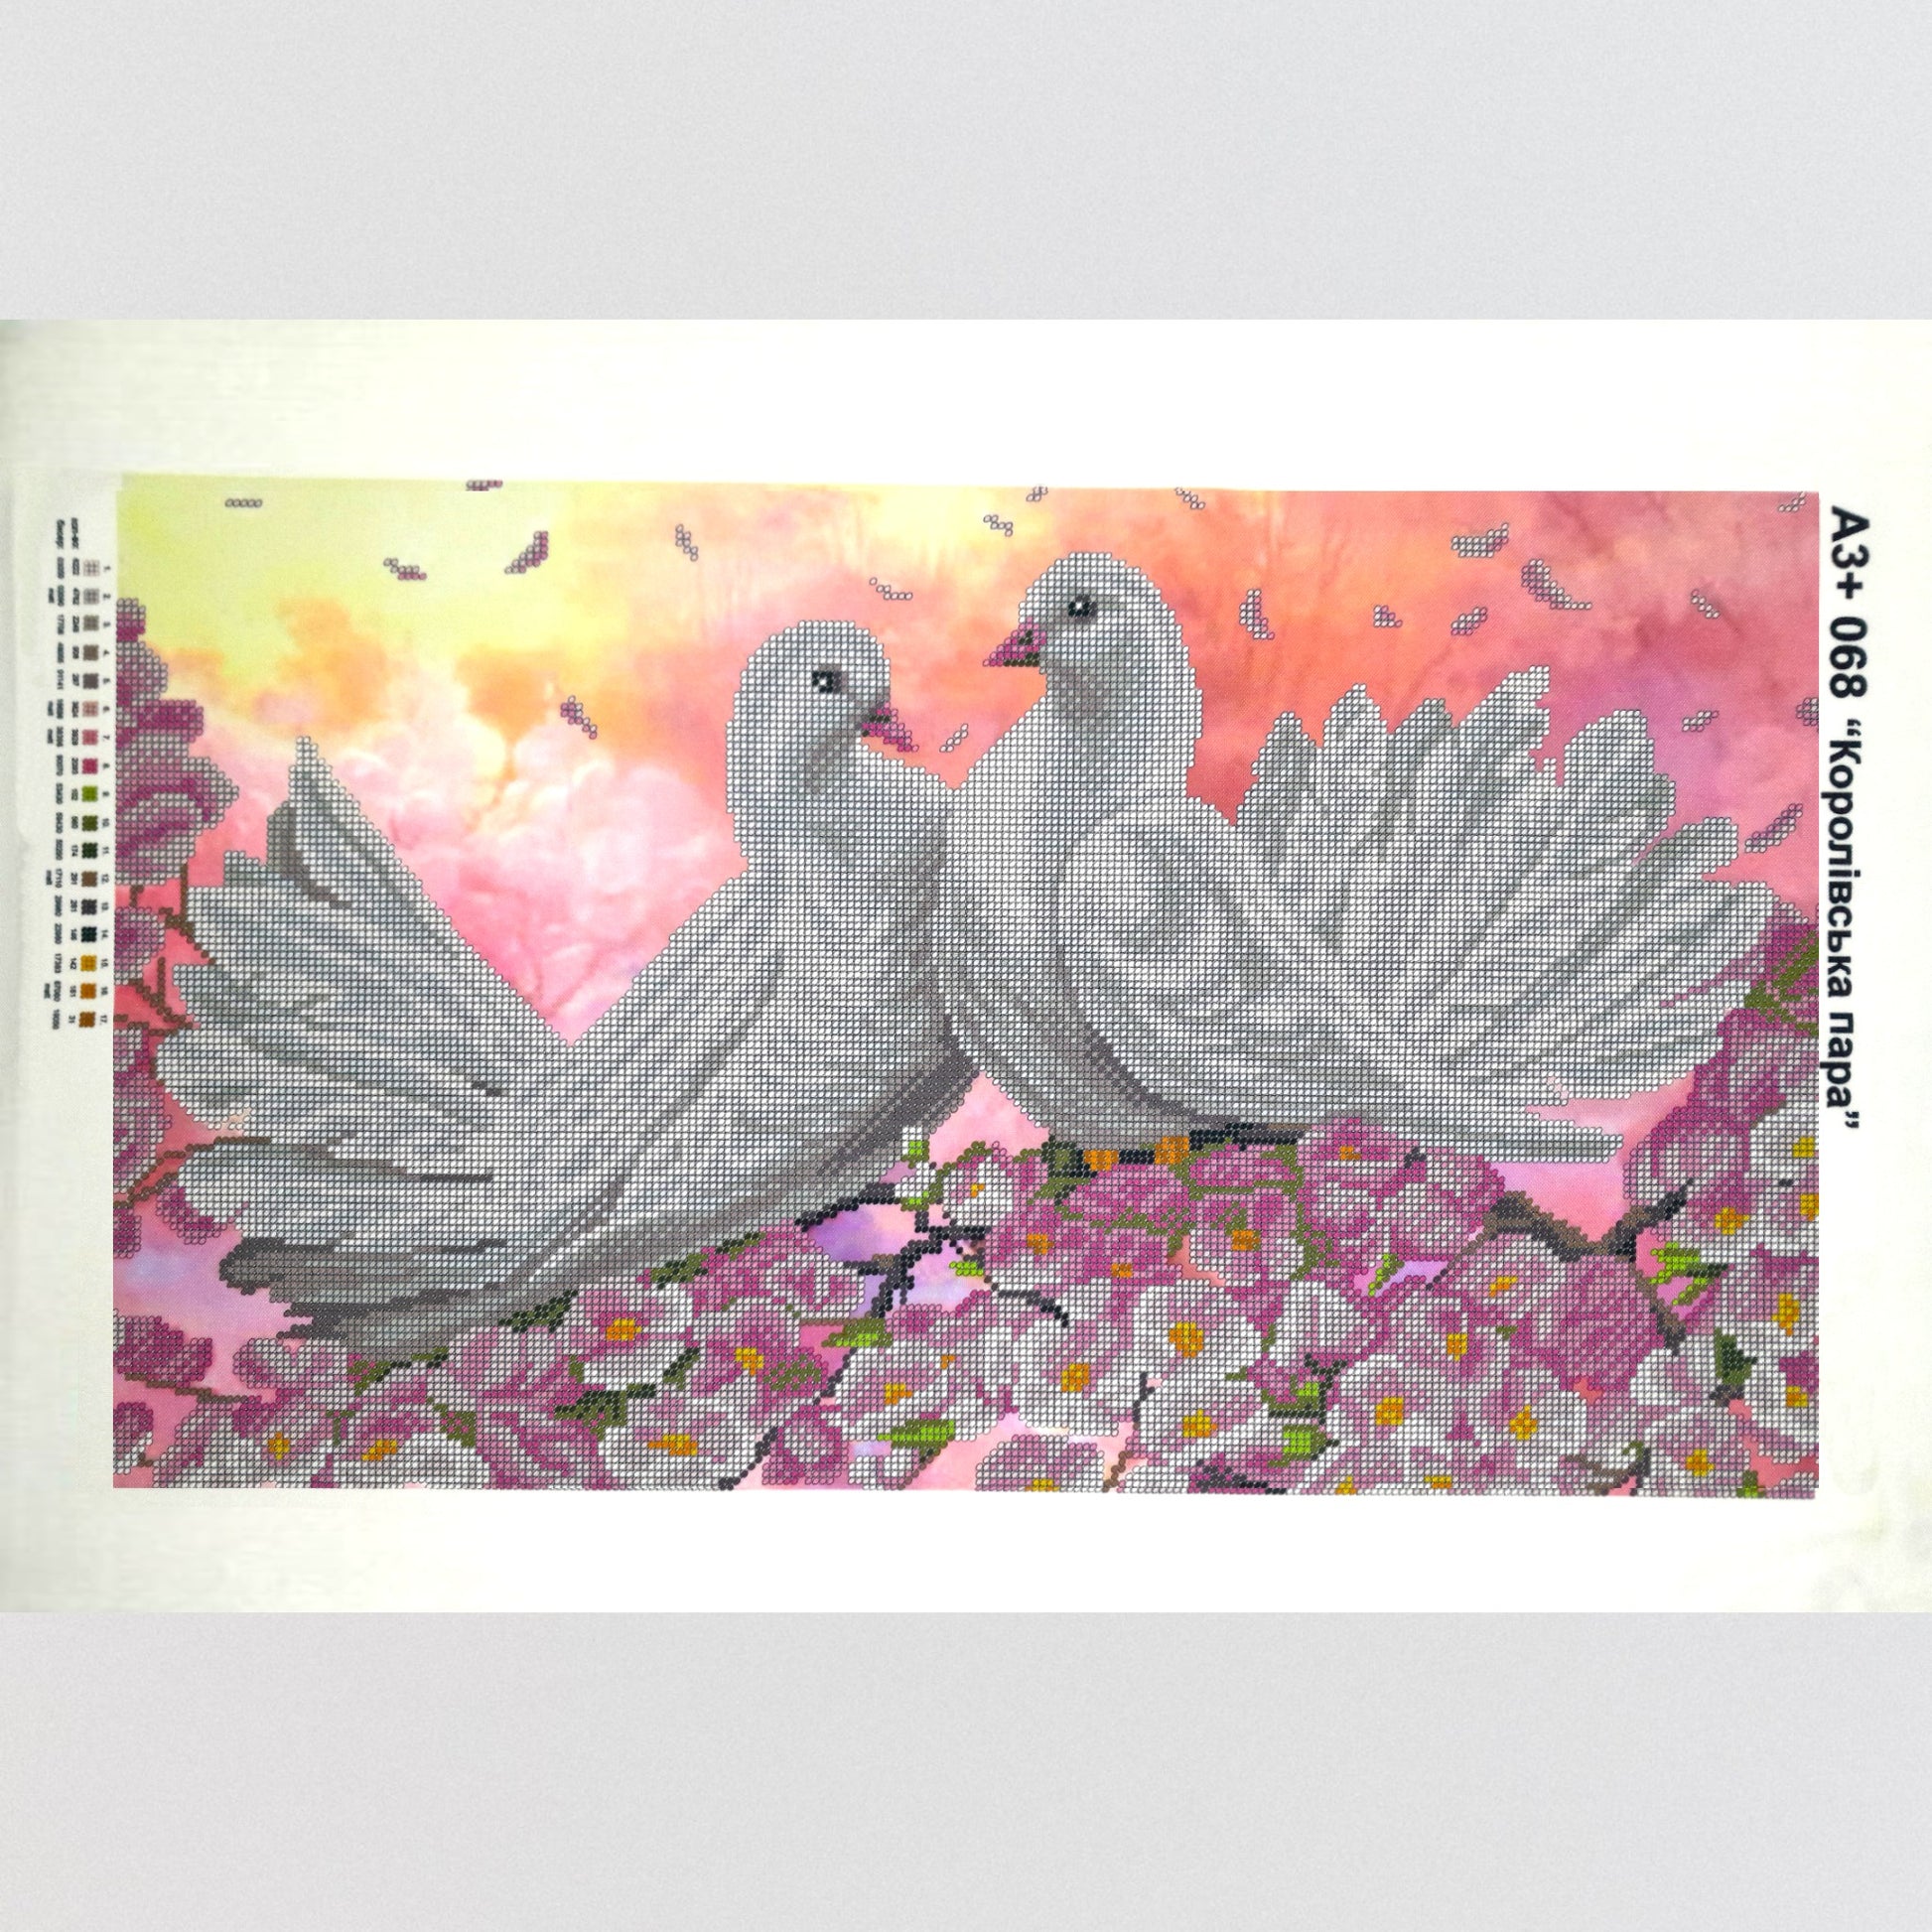 DIY Bead embroidery kit "Pigeons". Size: 19.6-11.4in (50-29.5 сm) - VadymShop